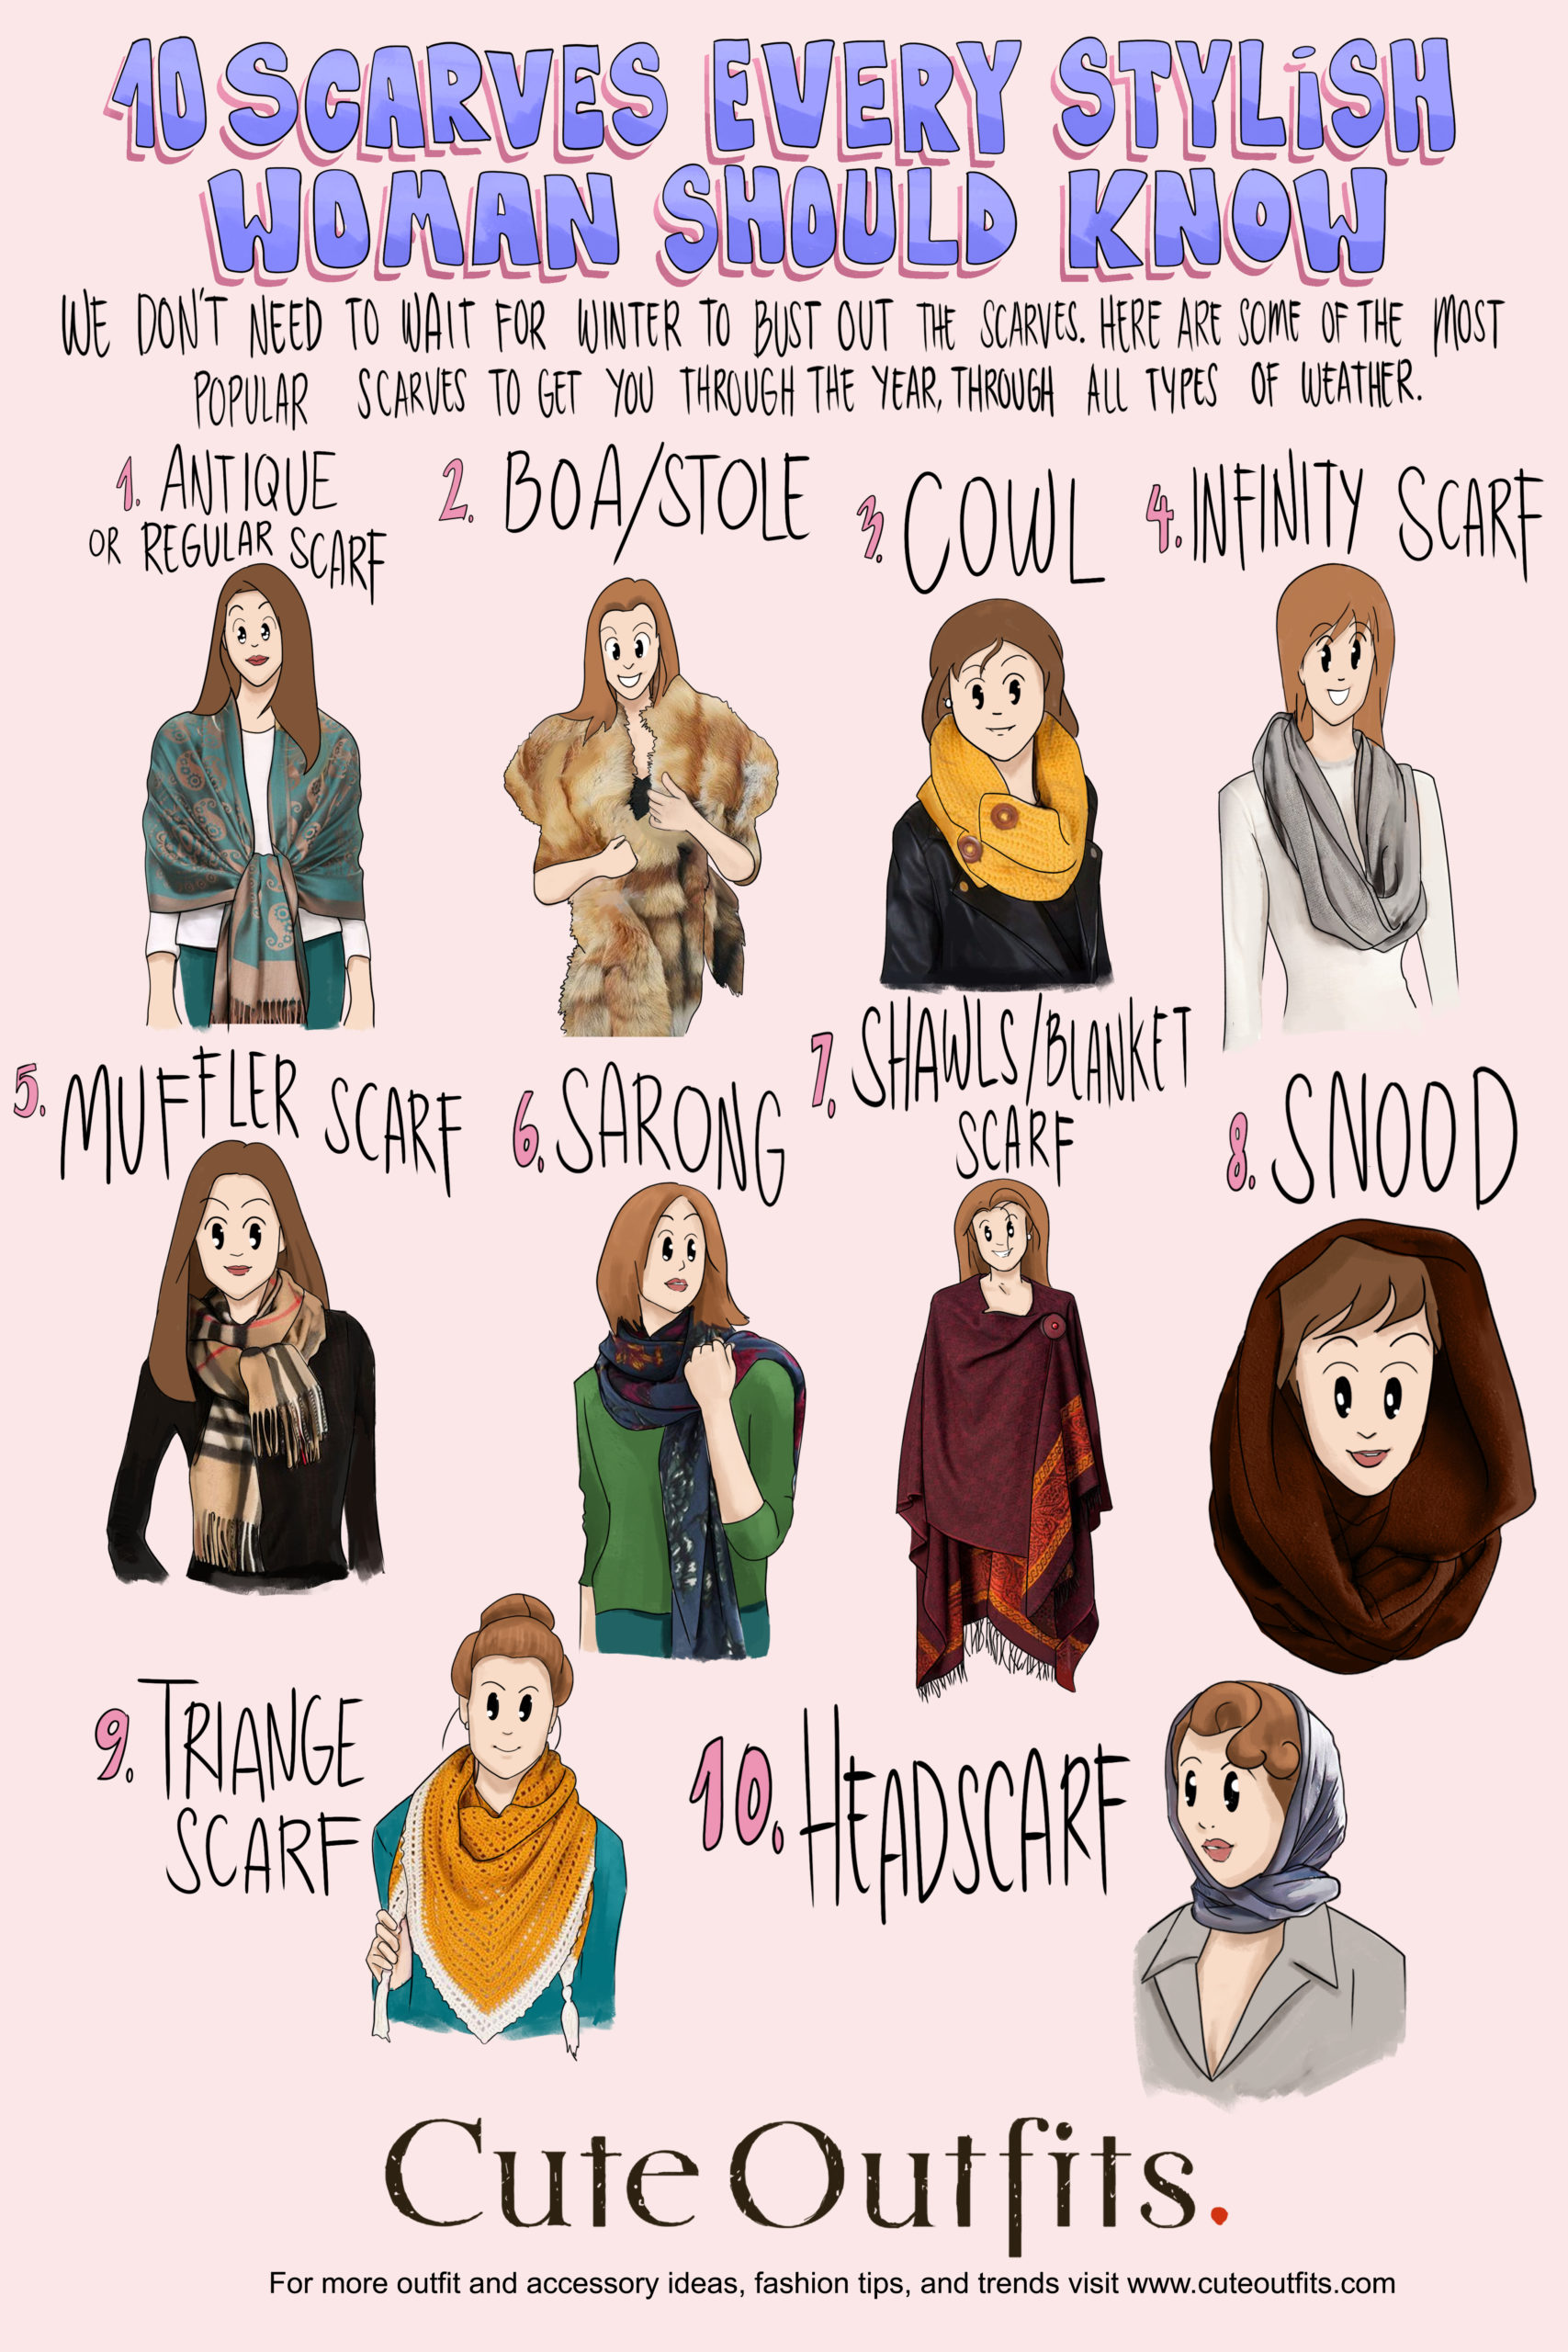 infographic | Scarves Every Stylish Woman should Know | Types of Scarves Every Stylish Woman Should Know